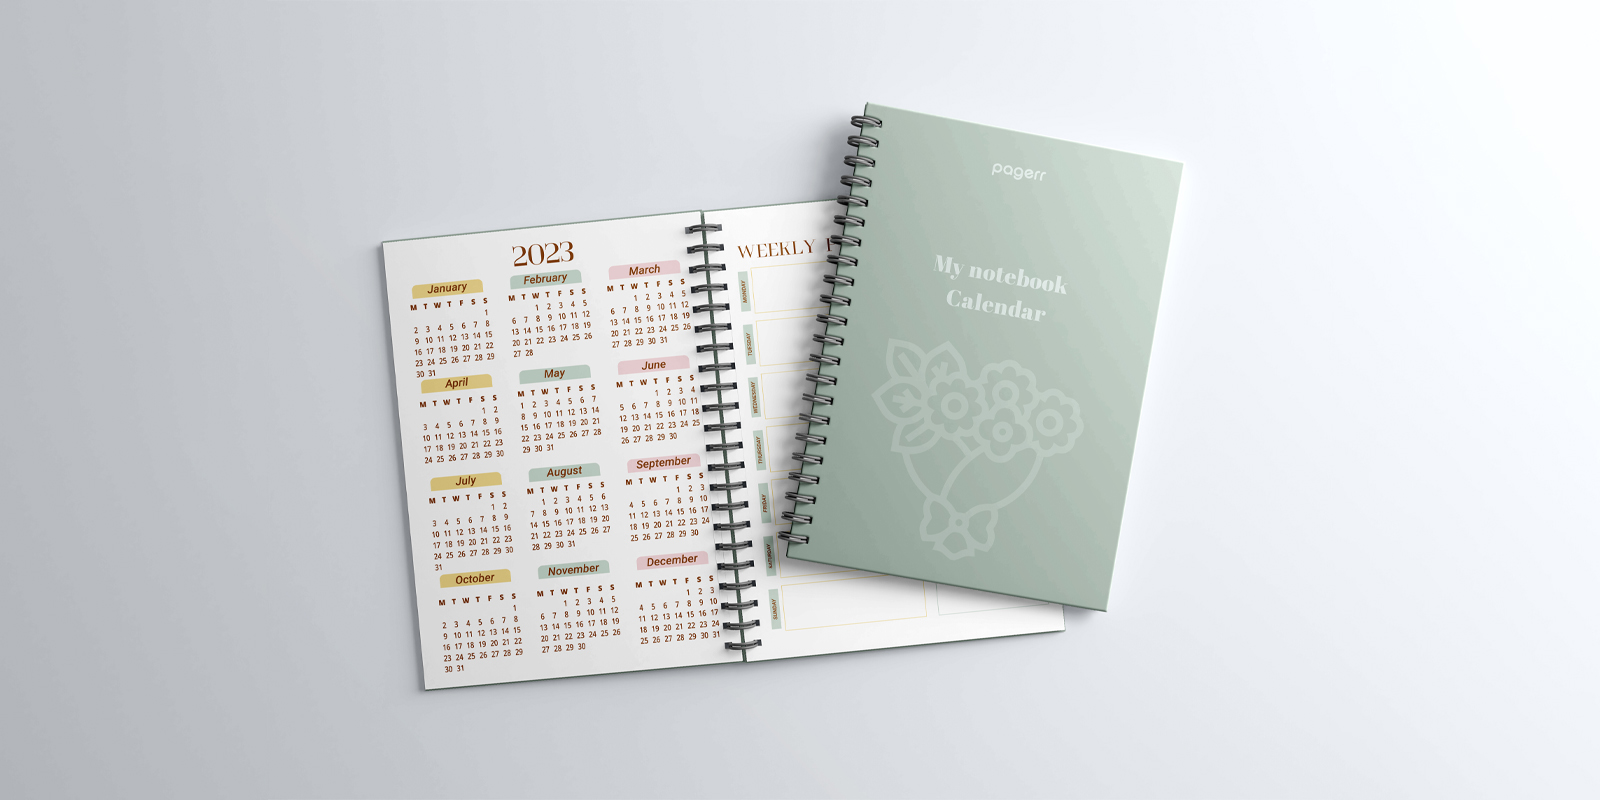 Notebook calendars in Geelong - Print with Pagerr